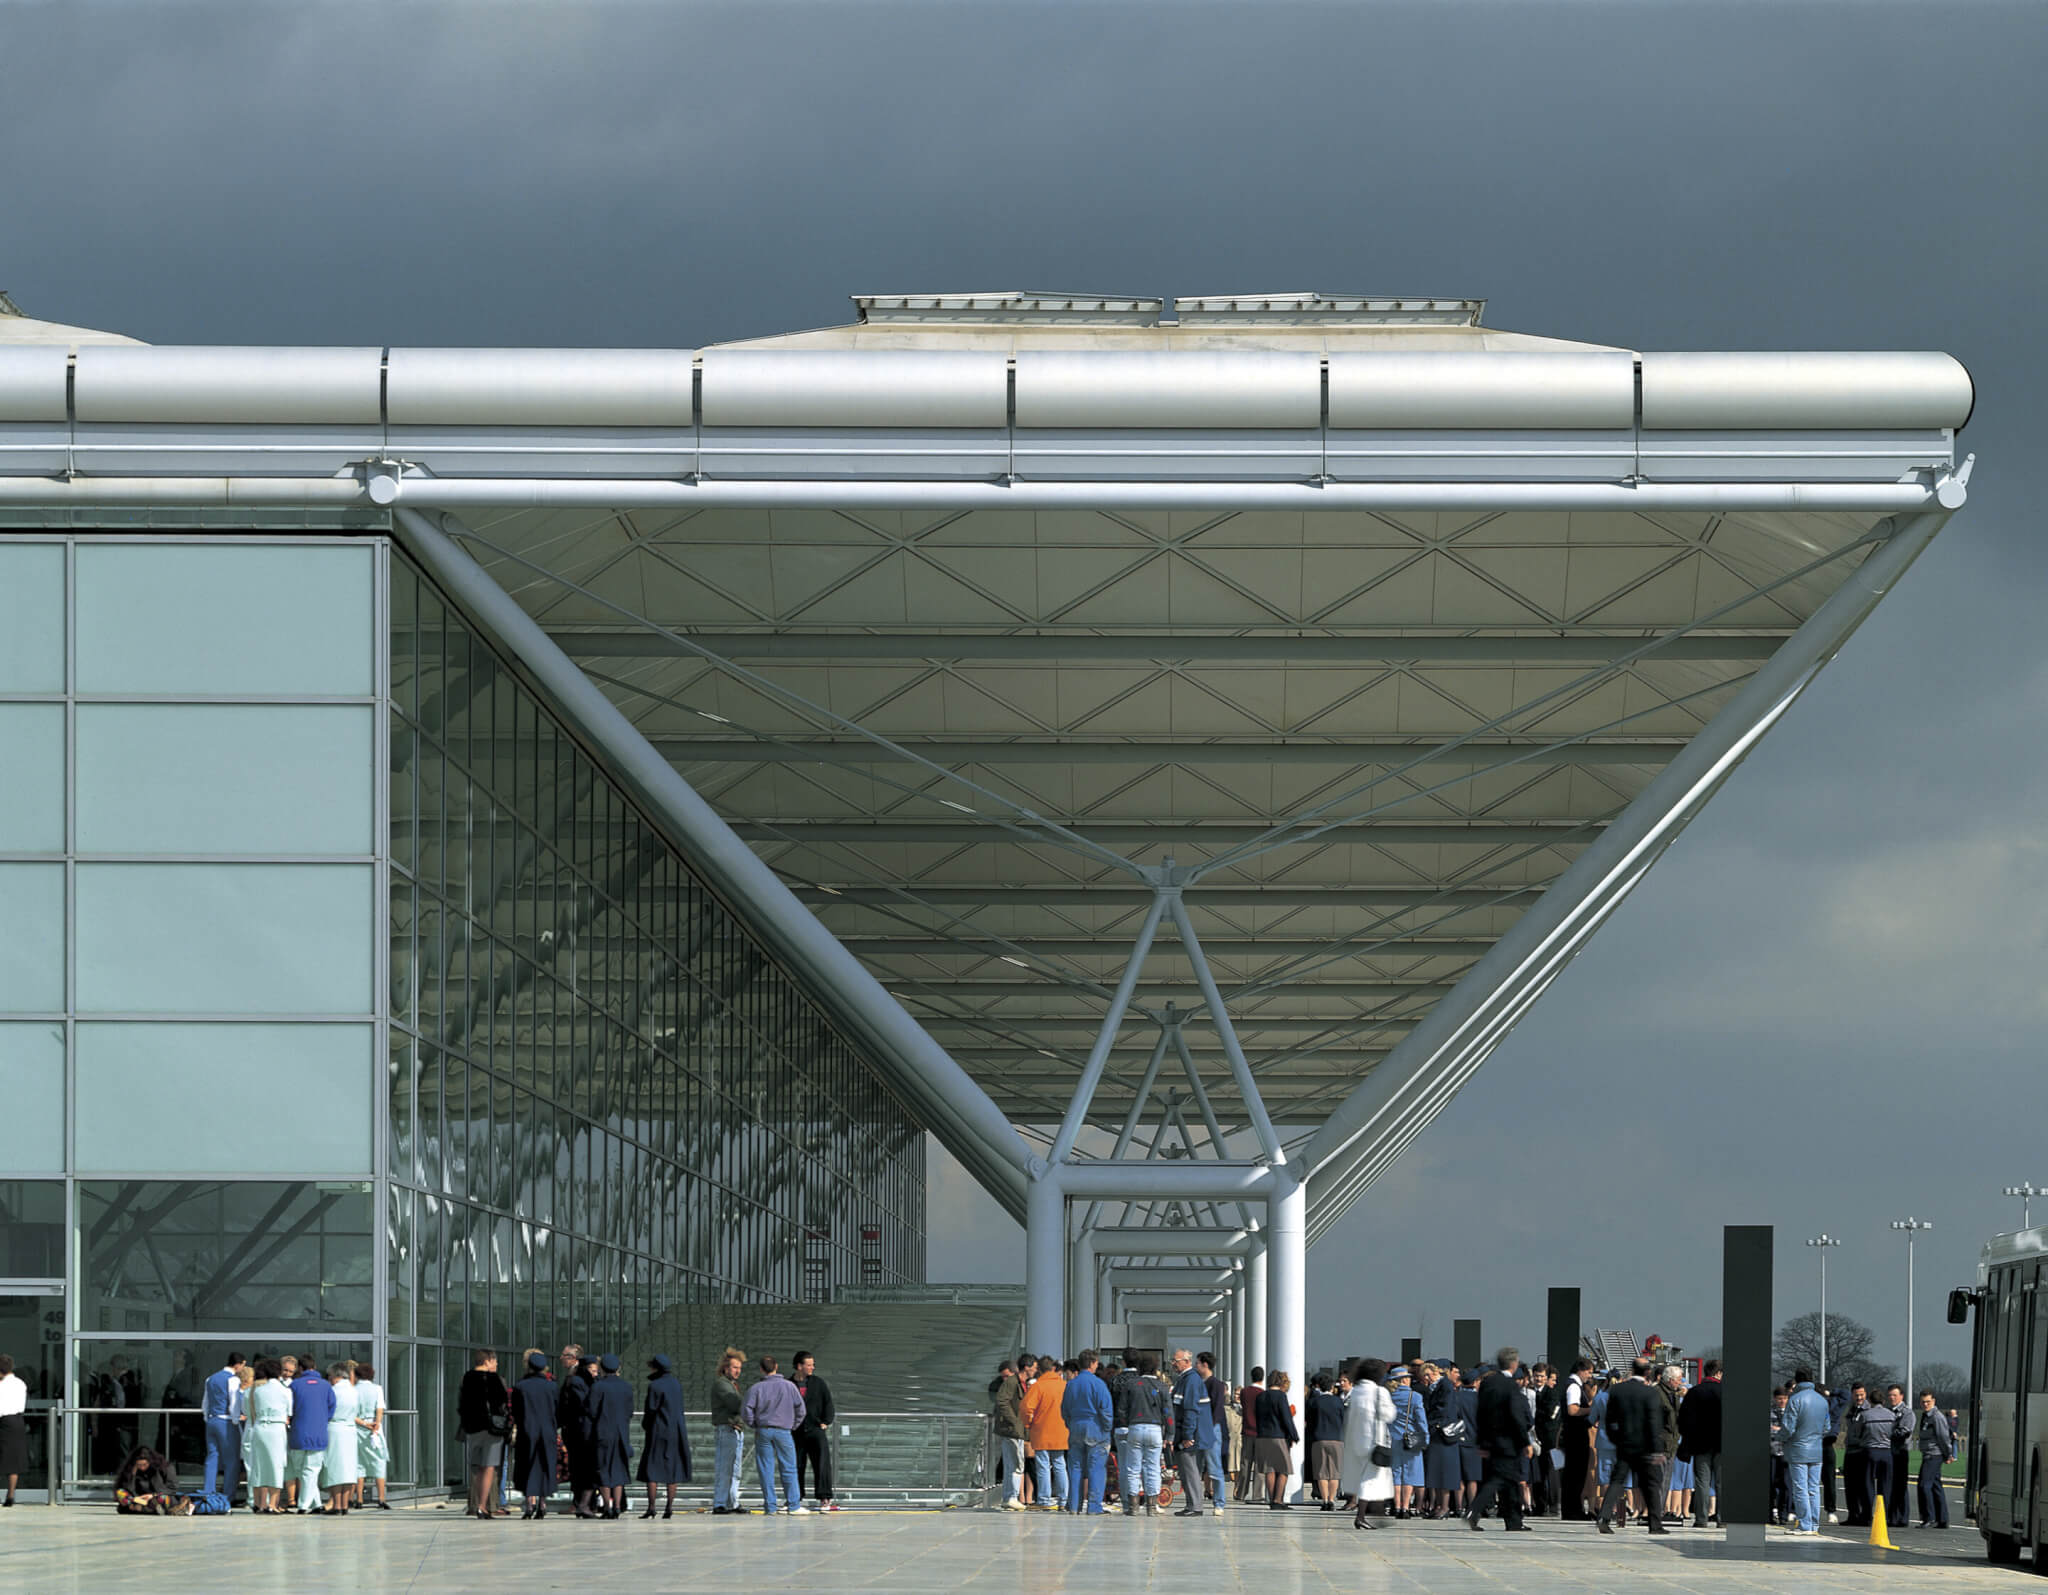 The terminal's roof extends by one structural bay to form a canopy over the set-down point.